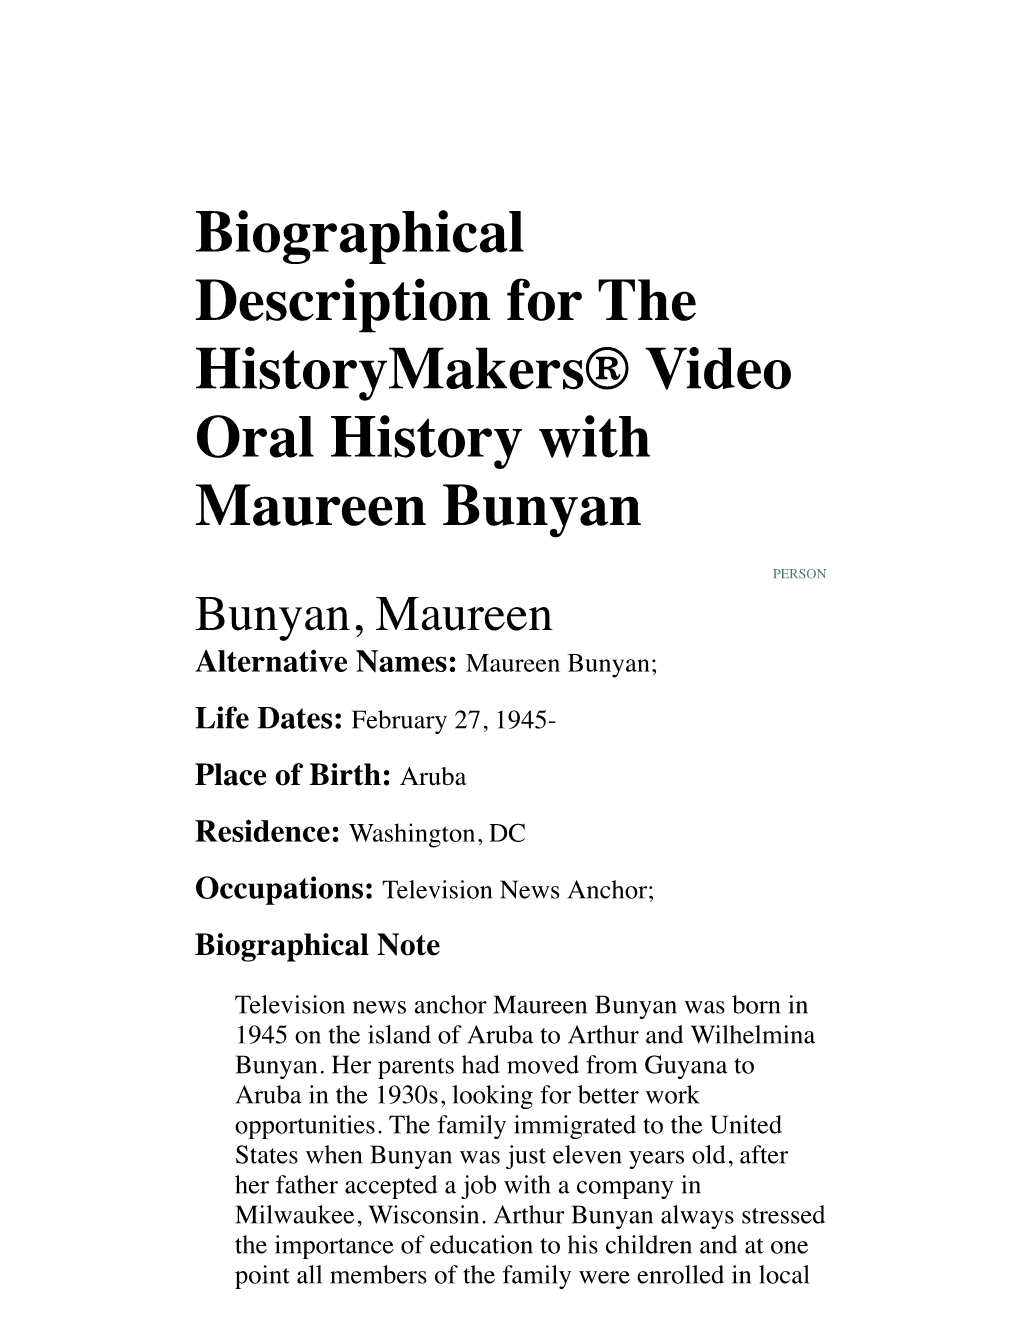 Biographical Description for the Historymakers® Video Oral History with Maureen Bunyan